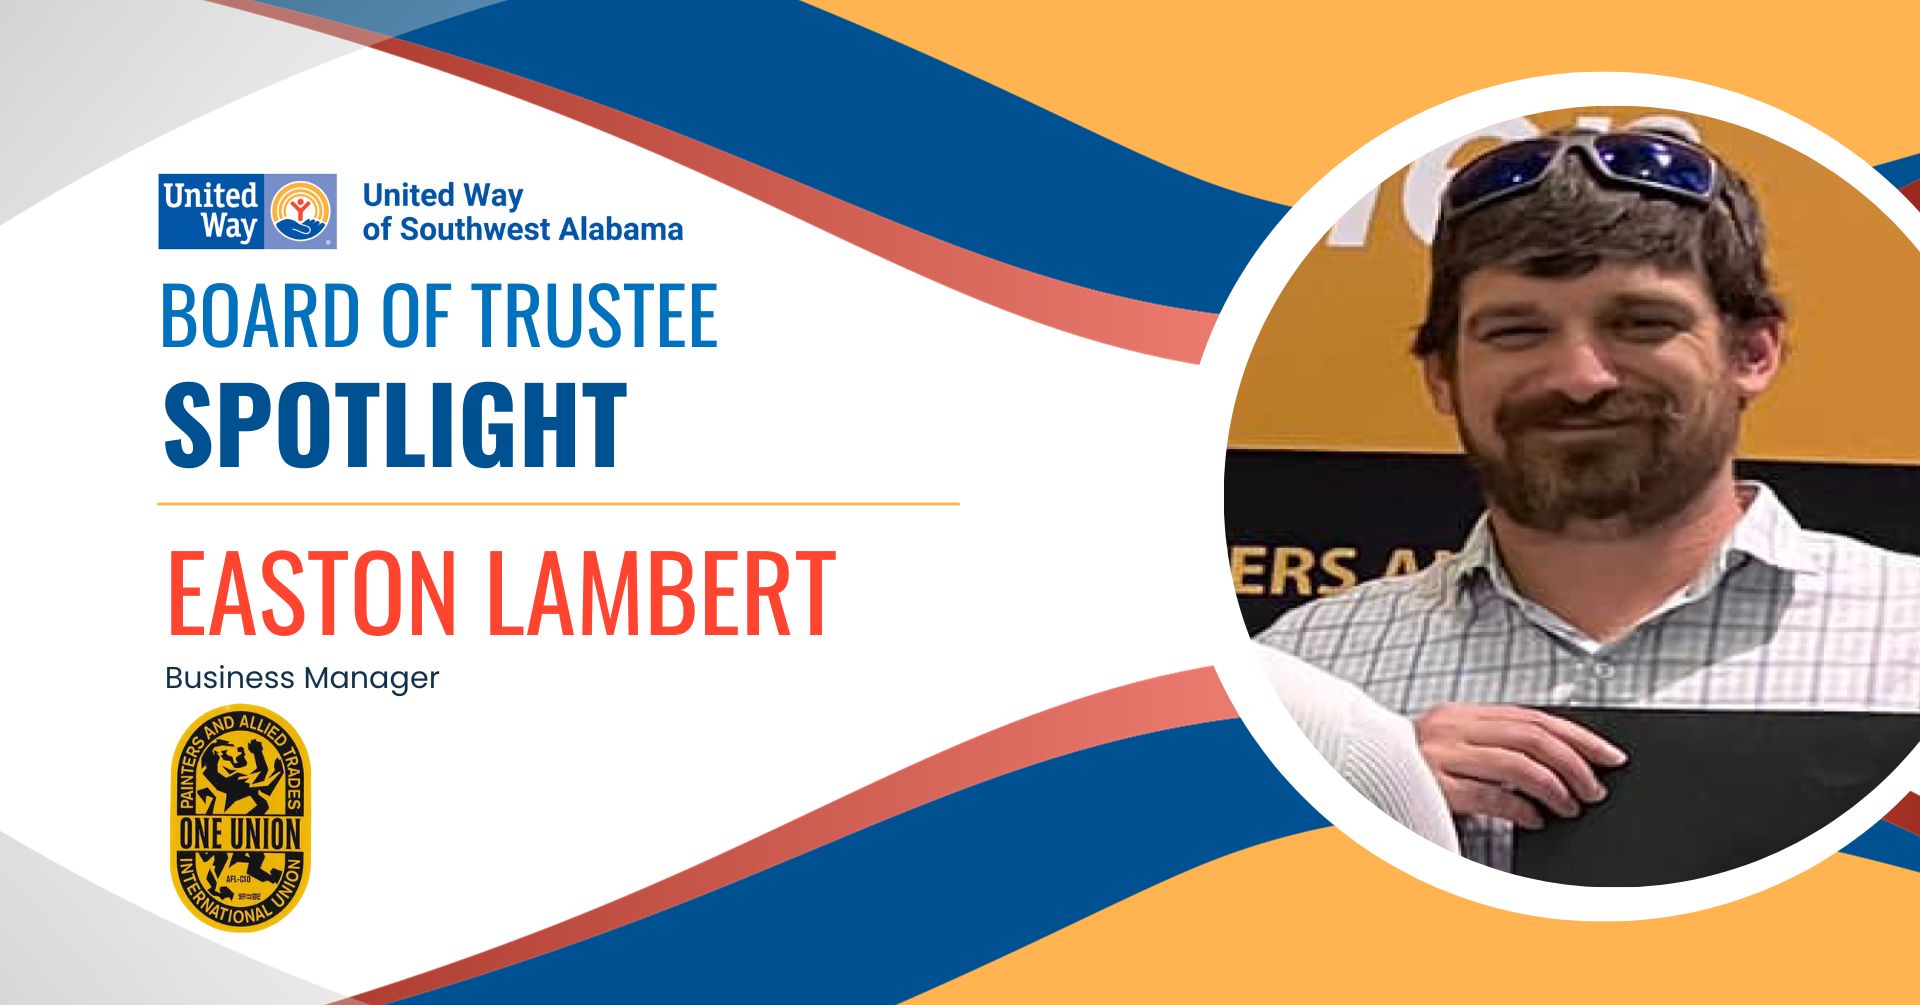 UWSWA Board of Trustee Spotlight - Easton Lambert, Business Manager of Painters & Allied Trades District Council 77